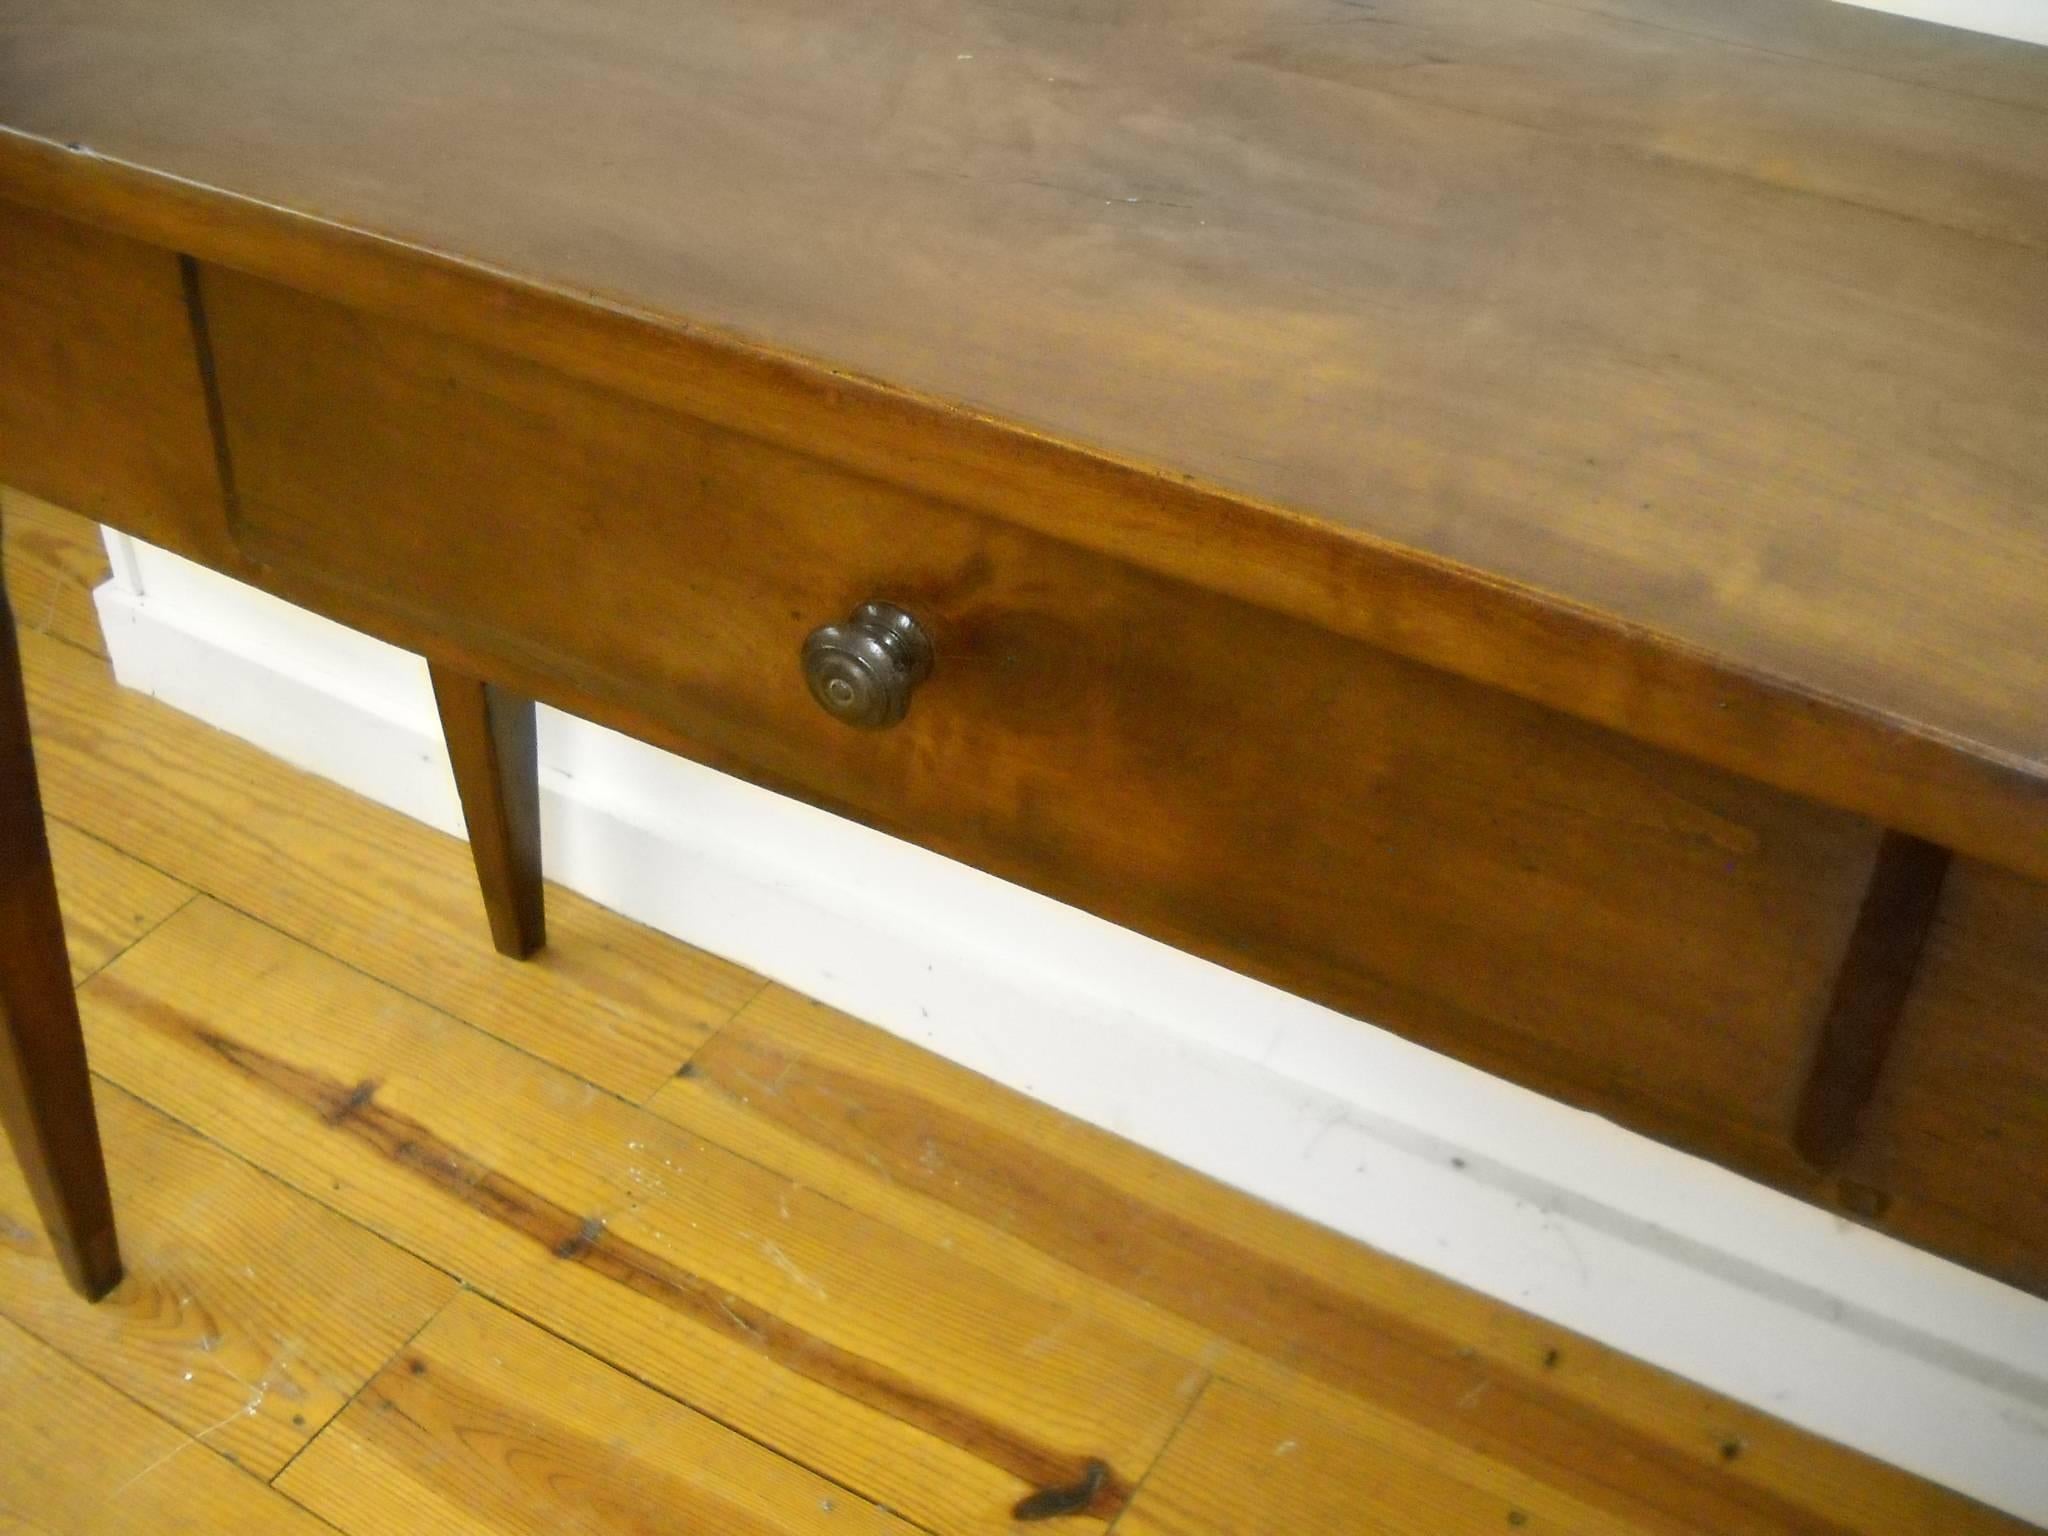 This French serving table has two drawers, each a different size. That was quite common for the French and adds great character to this piece. What dominates your eye on this server is the patina. It is gorgeous! In a hallway or under a long sofa